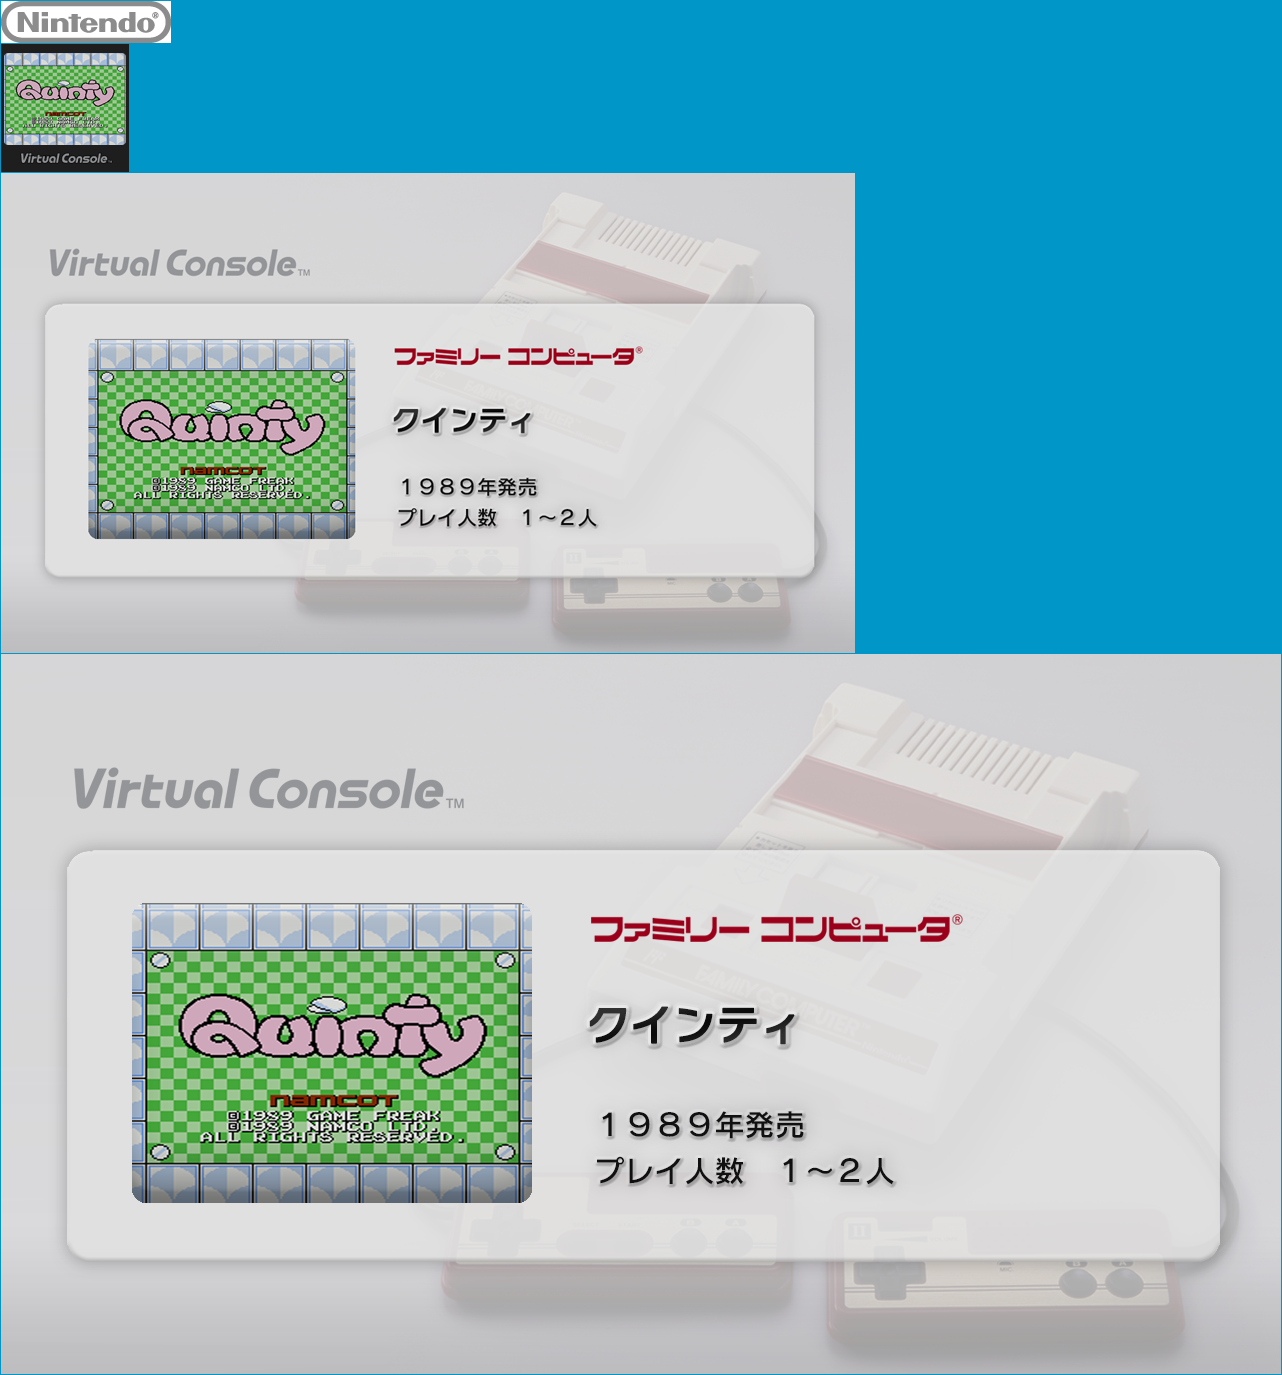 Virtual Console - Quinty